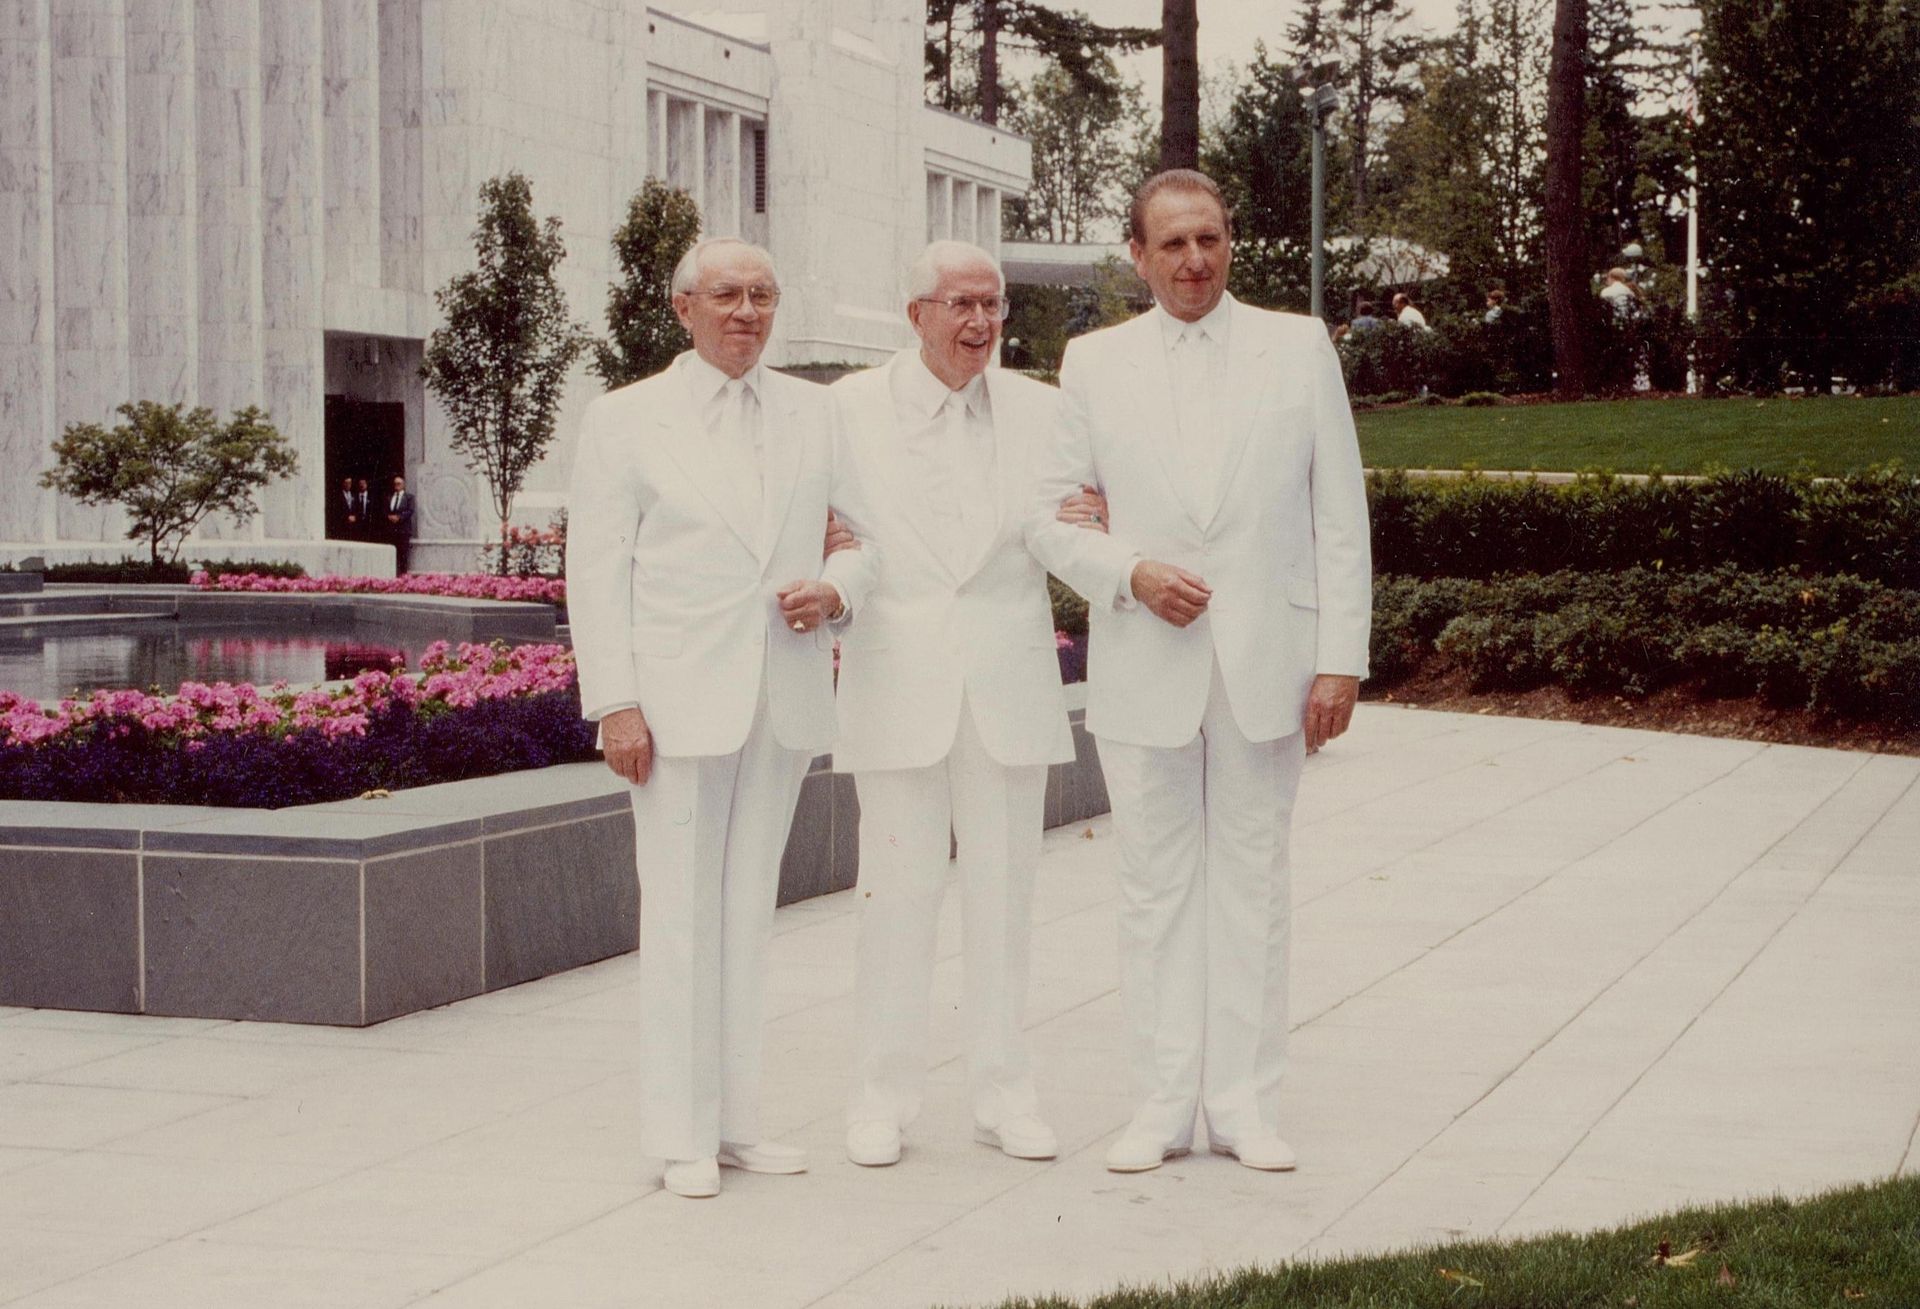 President Benson standing with his counselors at the Portland Oregon Temple dedication.